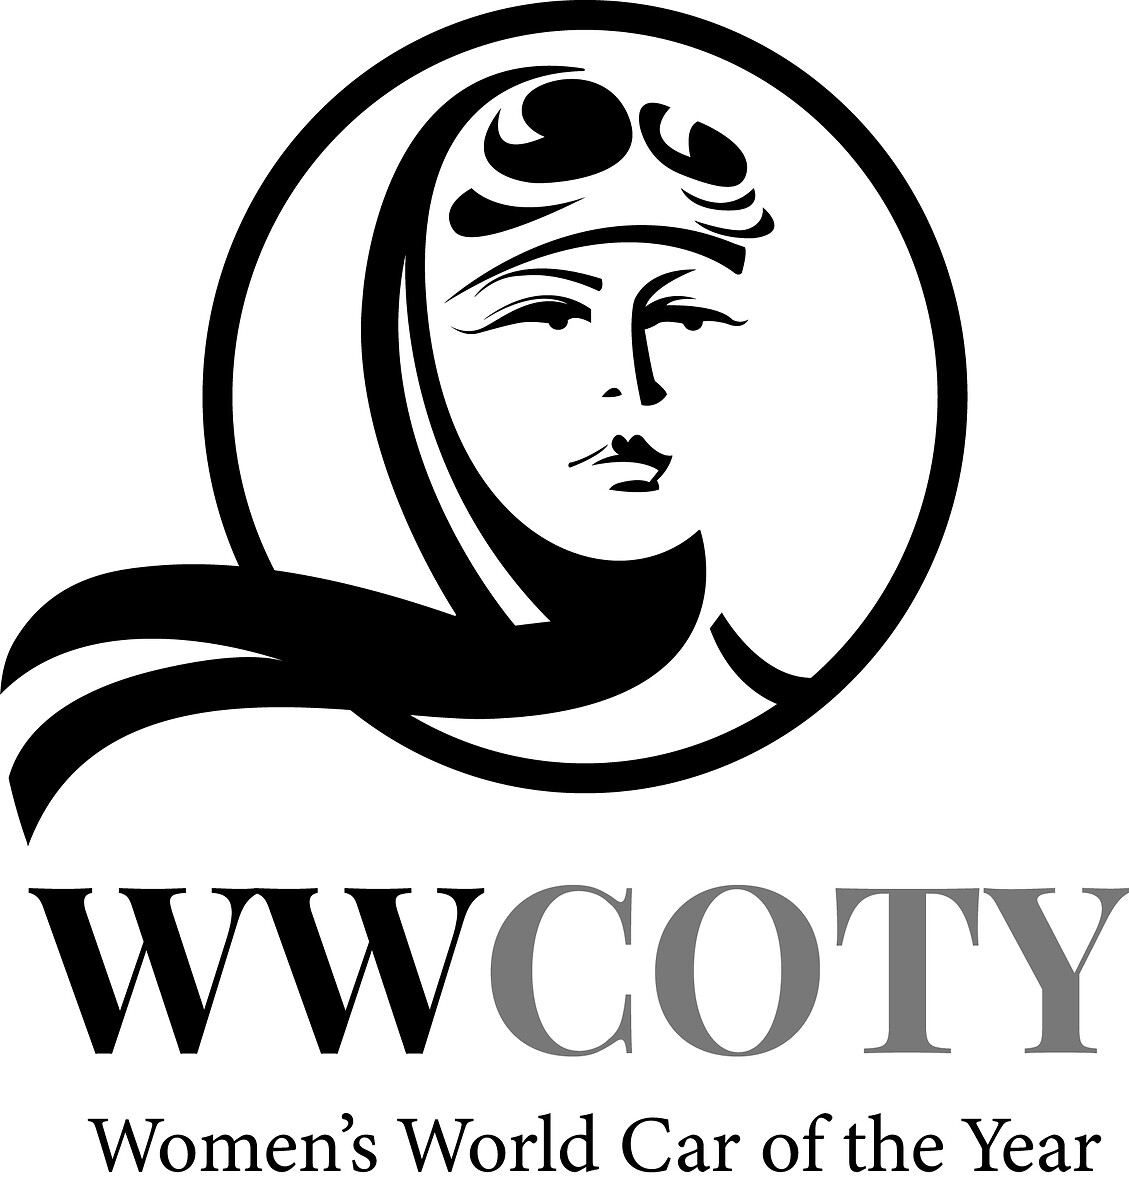 The new PEUGEOT 308, Women's World Car of the Year 2022 in the Urban  Vehicle category, Peugeot